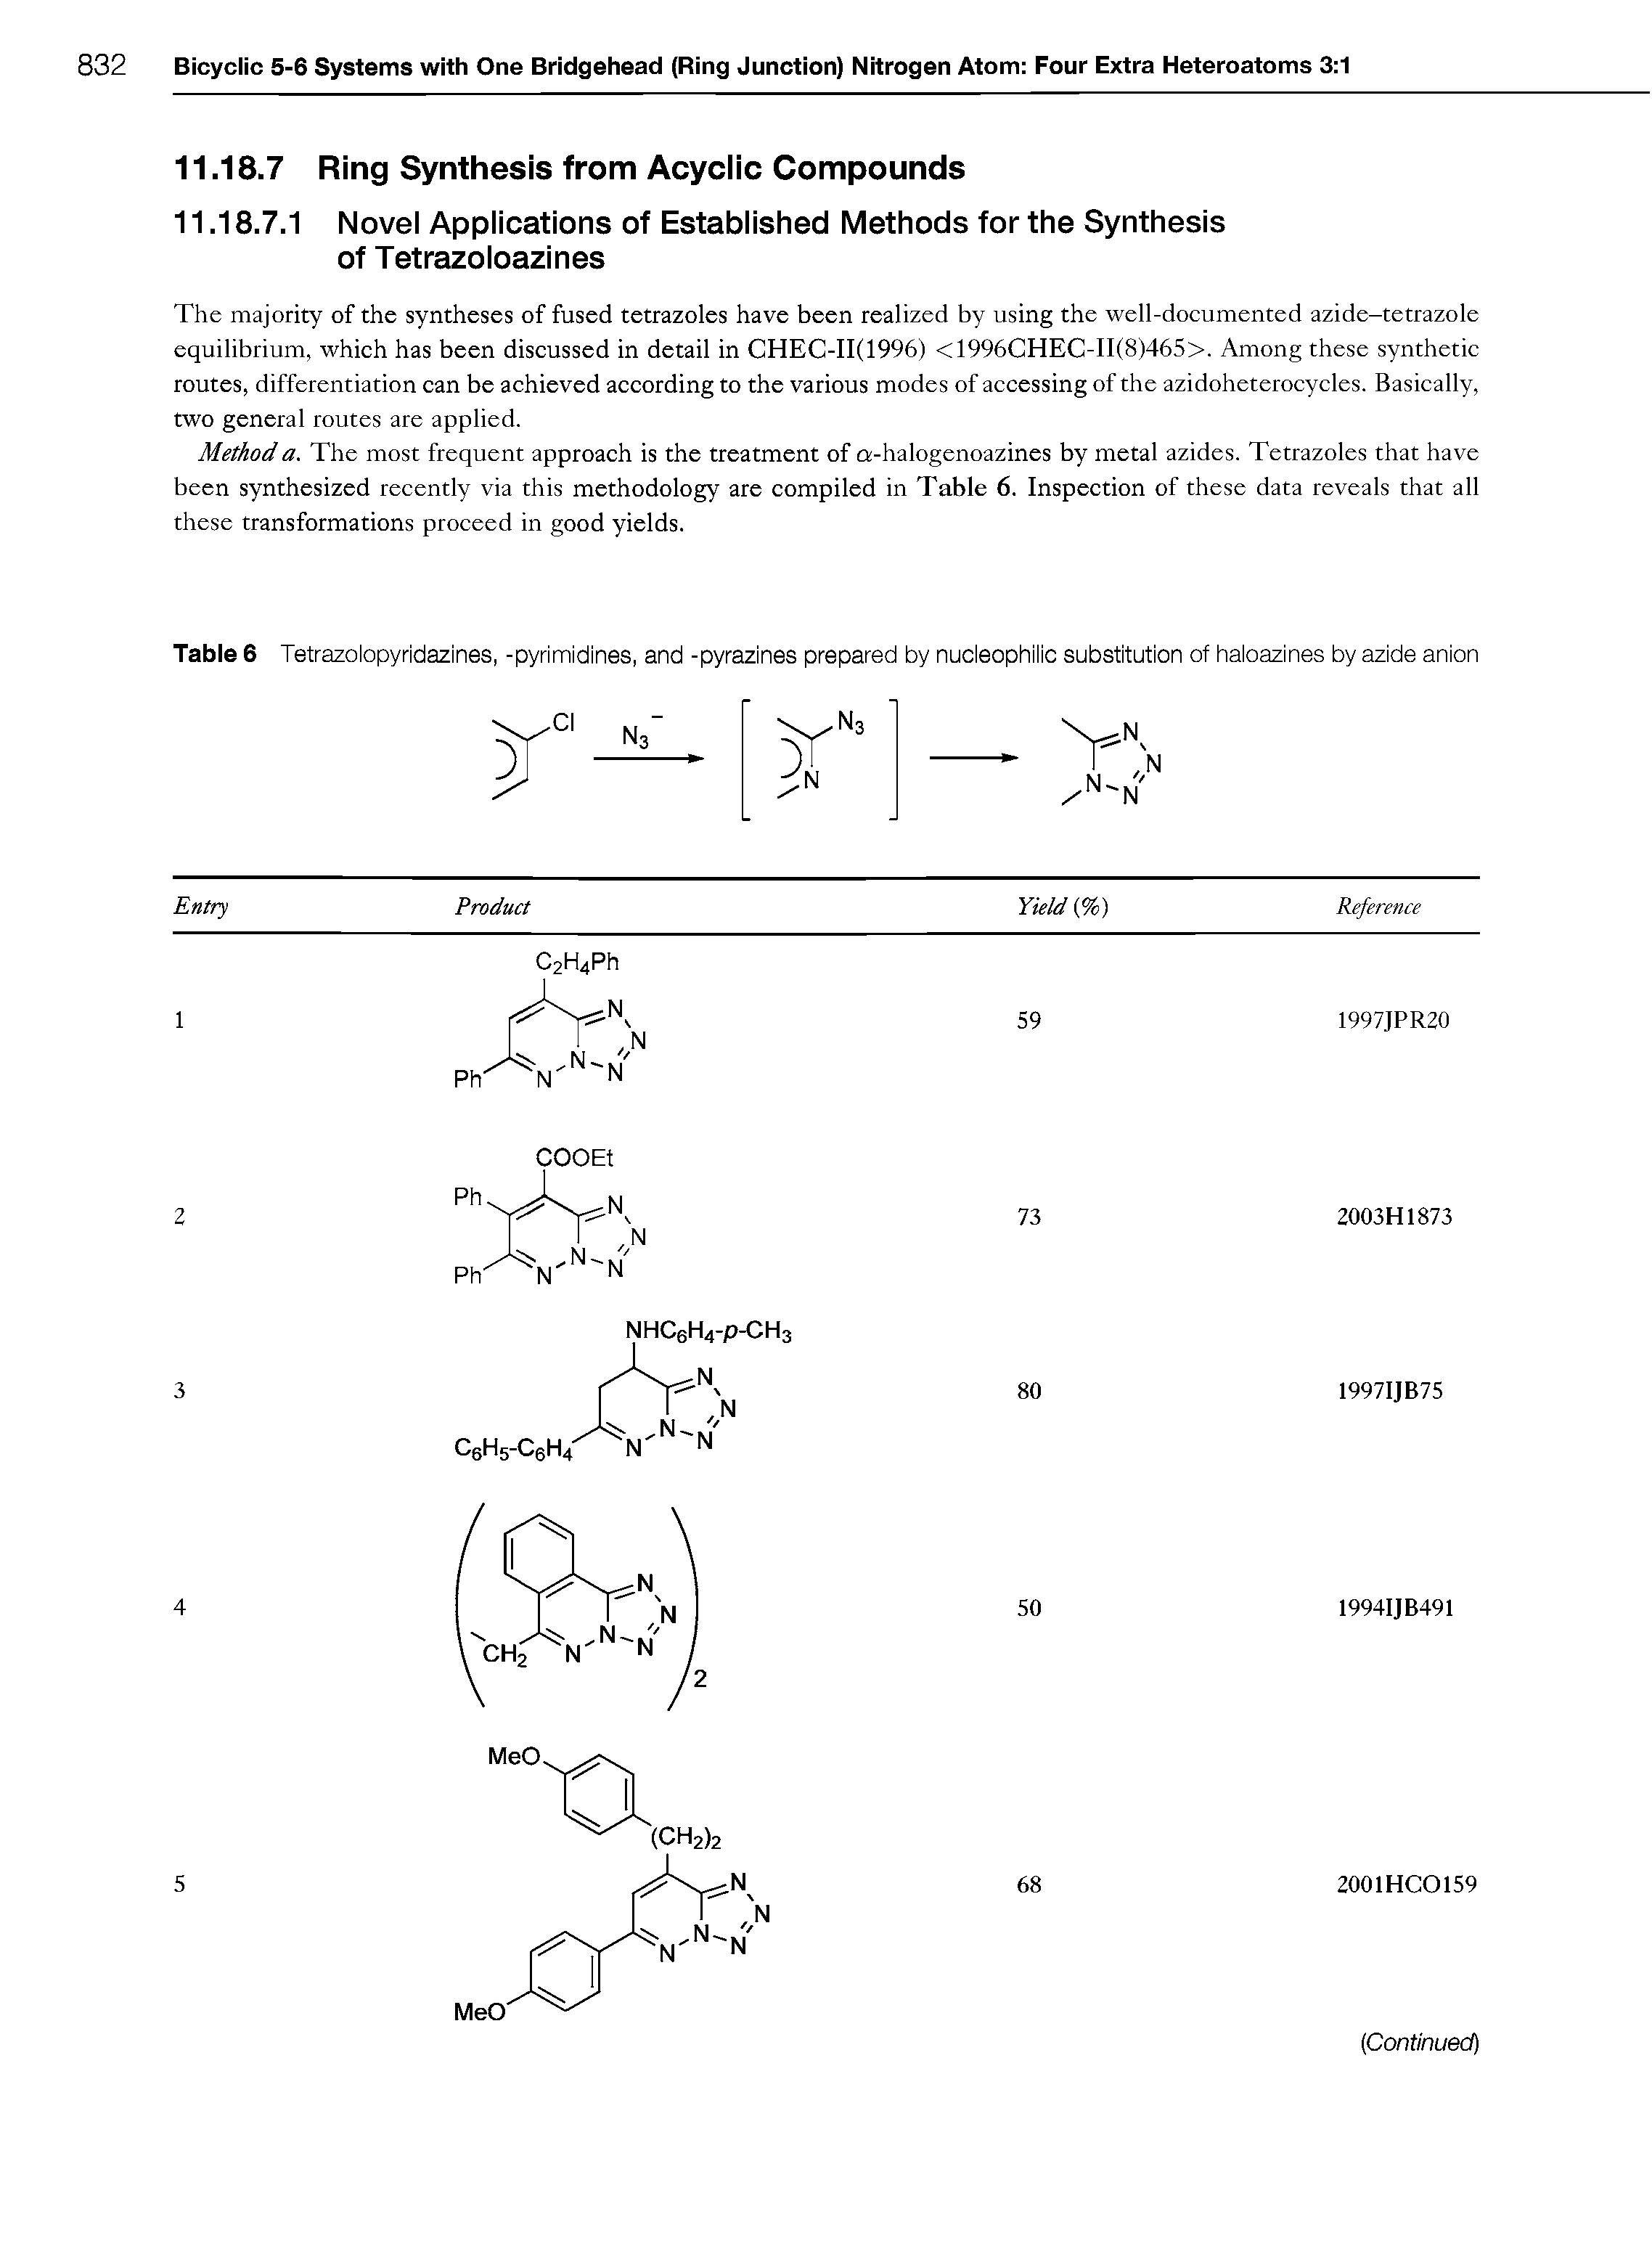 Table 6 Tetrazolopyridazines, -pyrimidines, and -pyrazines prepared by nucleophilic substitution of haloazines by azide anion...